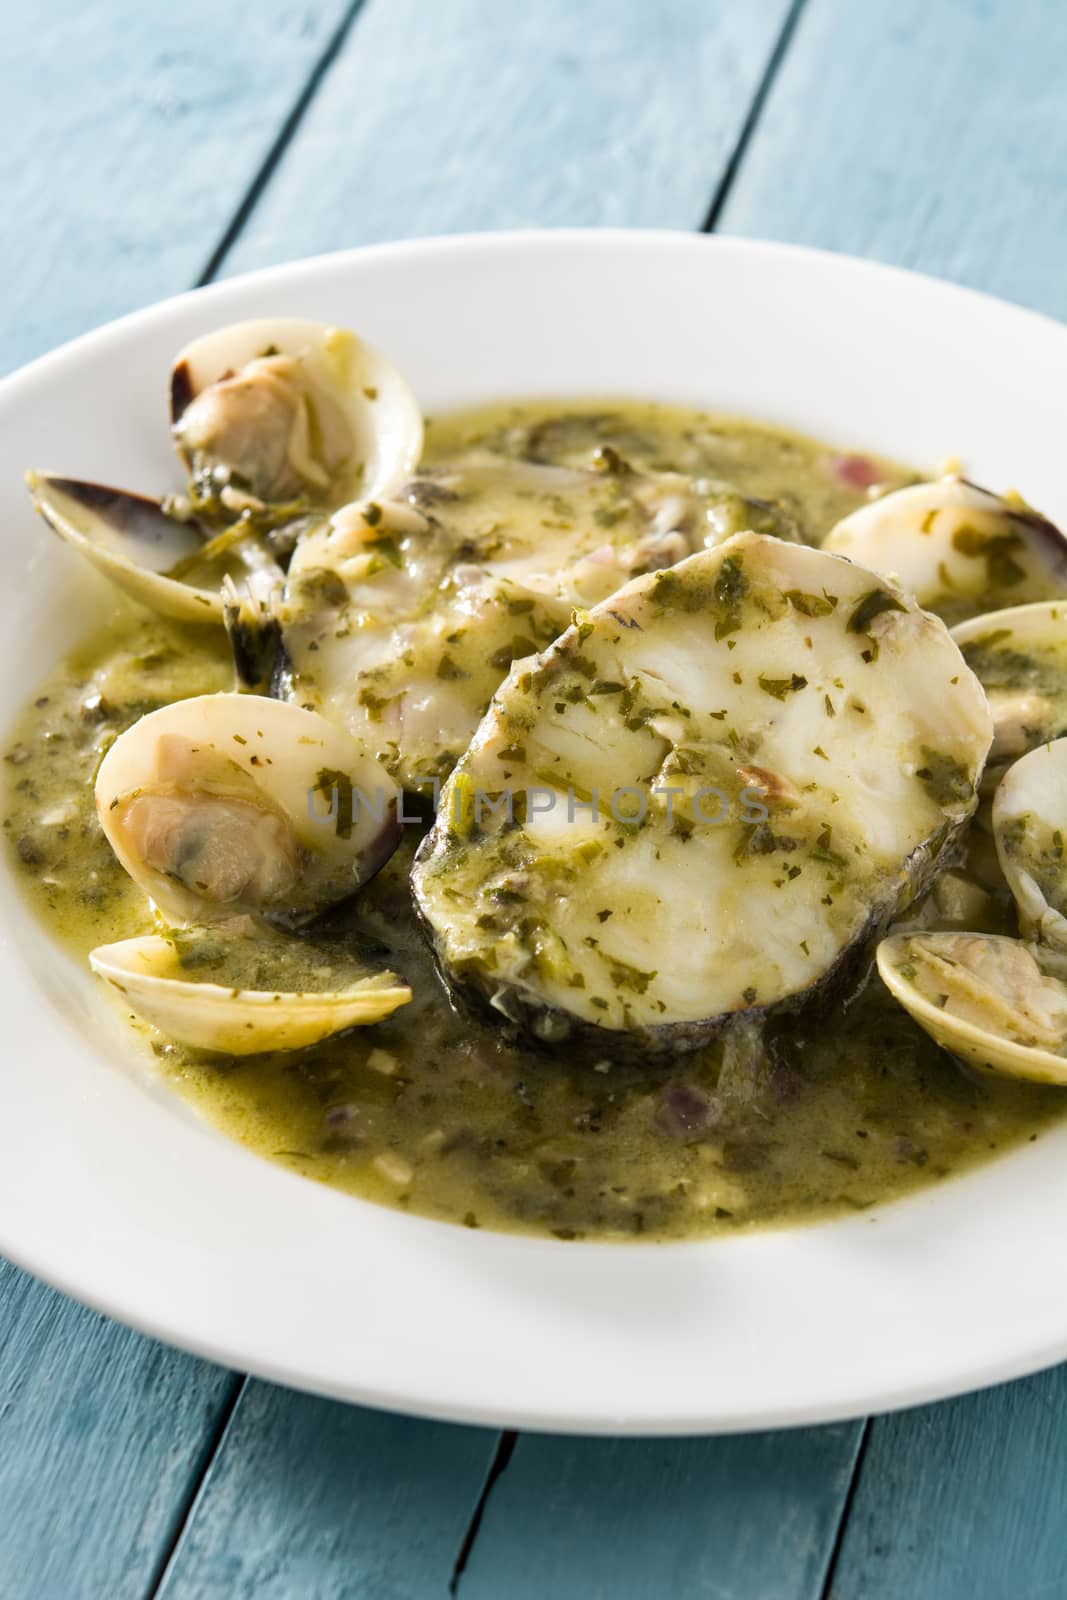 Hake fish and clams with green sauce on blue wooden background